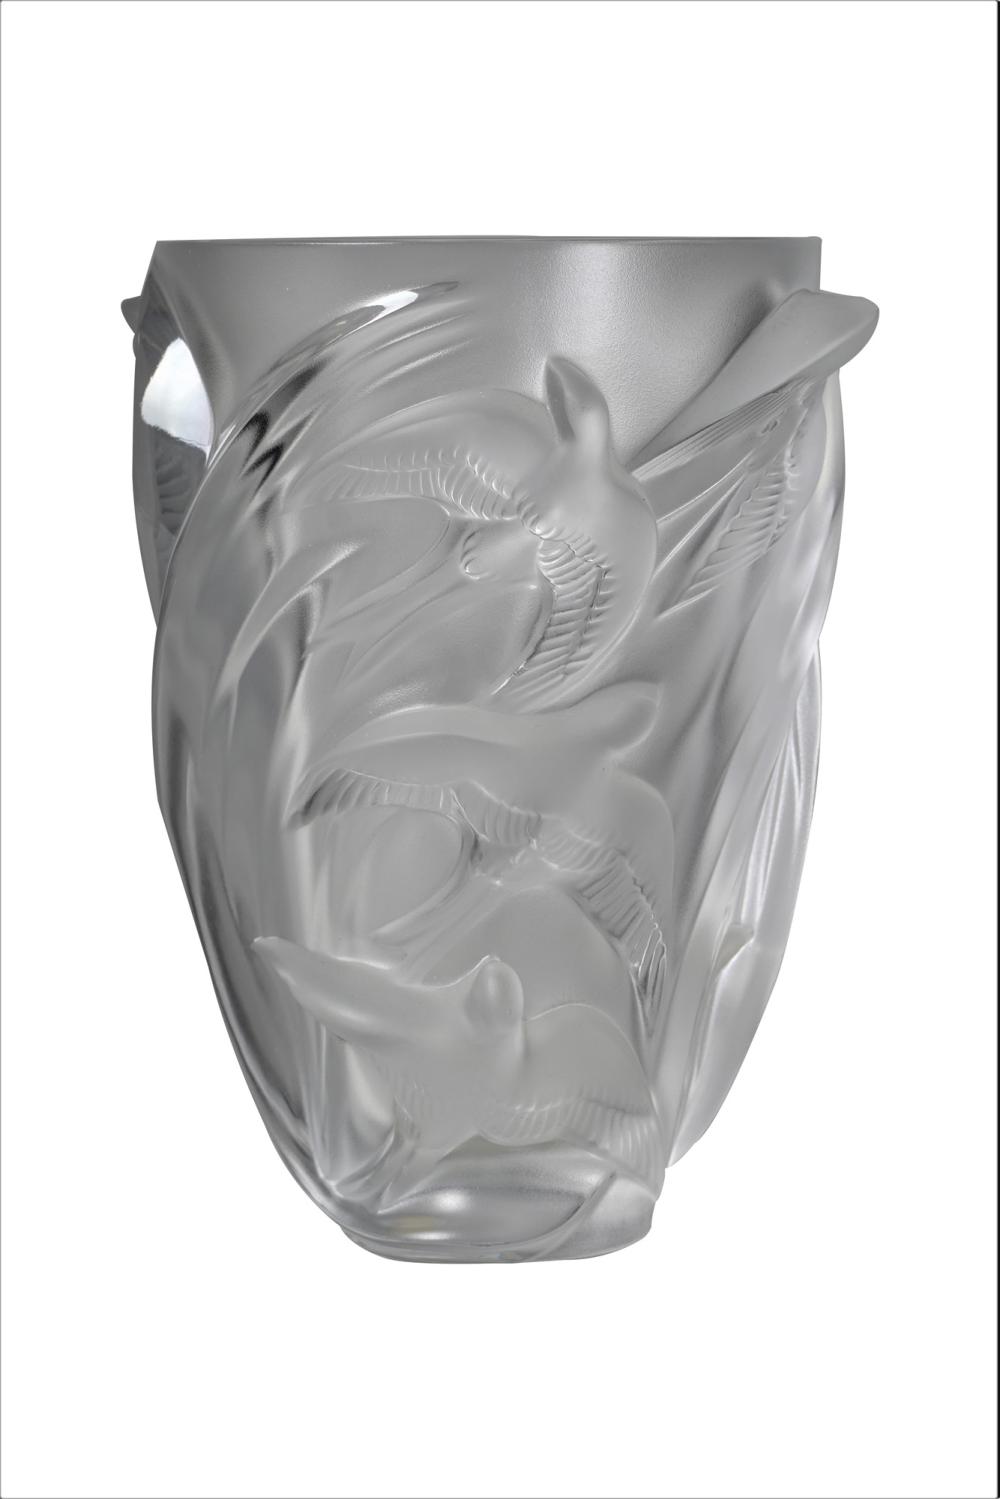 LALIQUE "MARTINETS" MOLDED GLASS